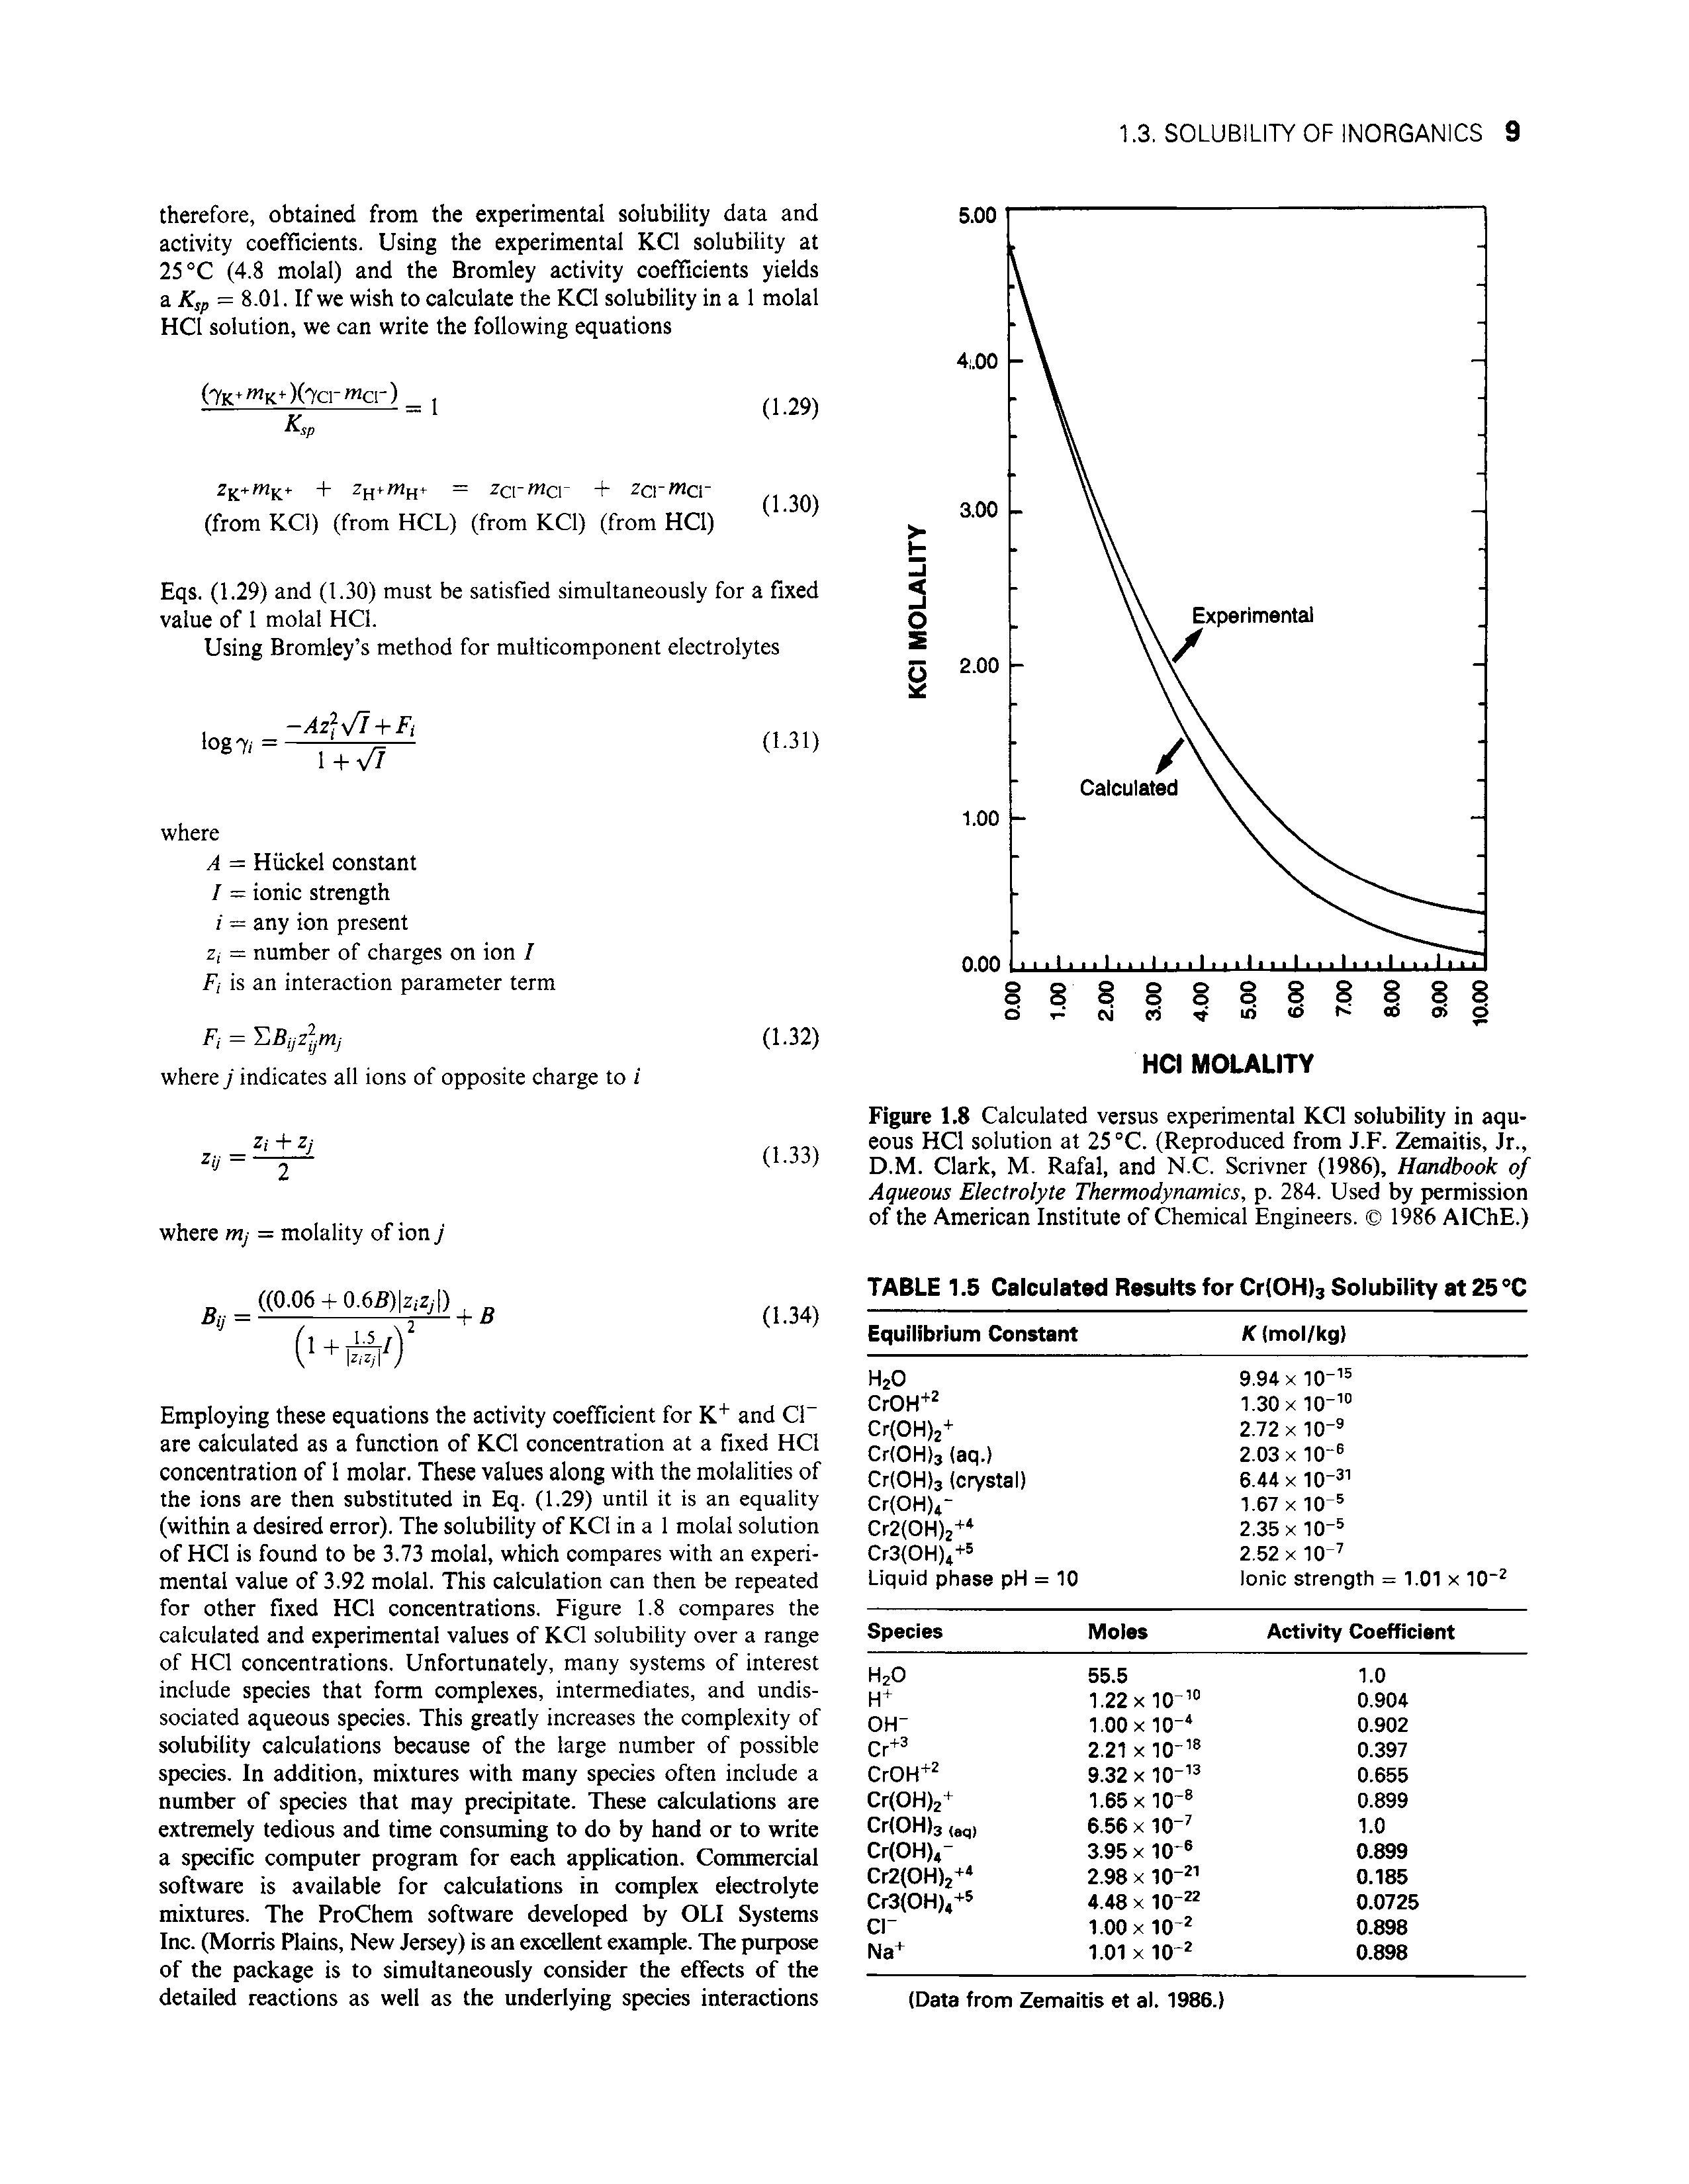 Figure 1.8 Calculated versus experimental KCl solubility in aqueous HCl solution at 25 °C. (Reproduced from J.F. Zemaitis, Jr., D.M. Clark, M. Rafal, and N.C. Scrivner (1986), Handbook of Aqueous Electrolyte Thermodynamics, p. 284. Used by permission of the American Institute of Chemical Engineers. 1986 AlChE.)...